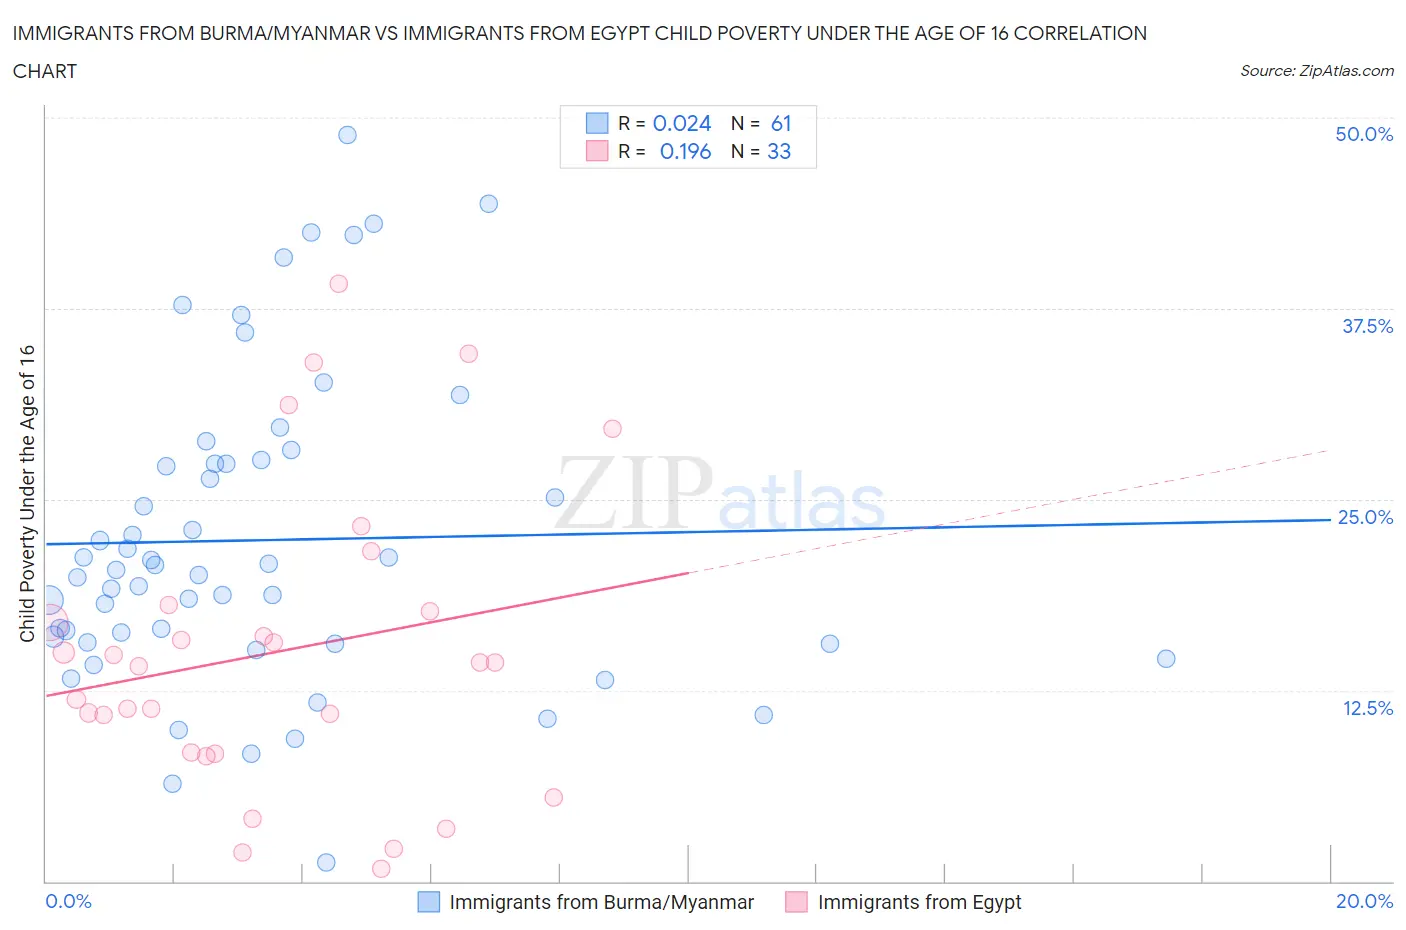 Immigrants from Burma/Myanmar vs Immigrants from Egypt Child Poverty Under the Age of 16